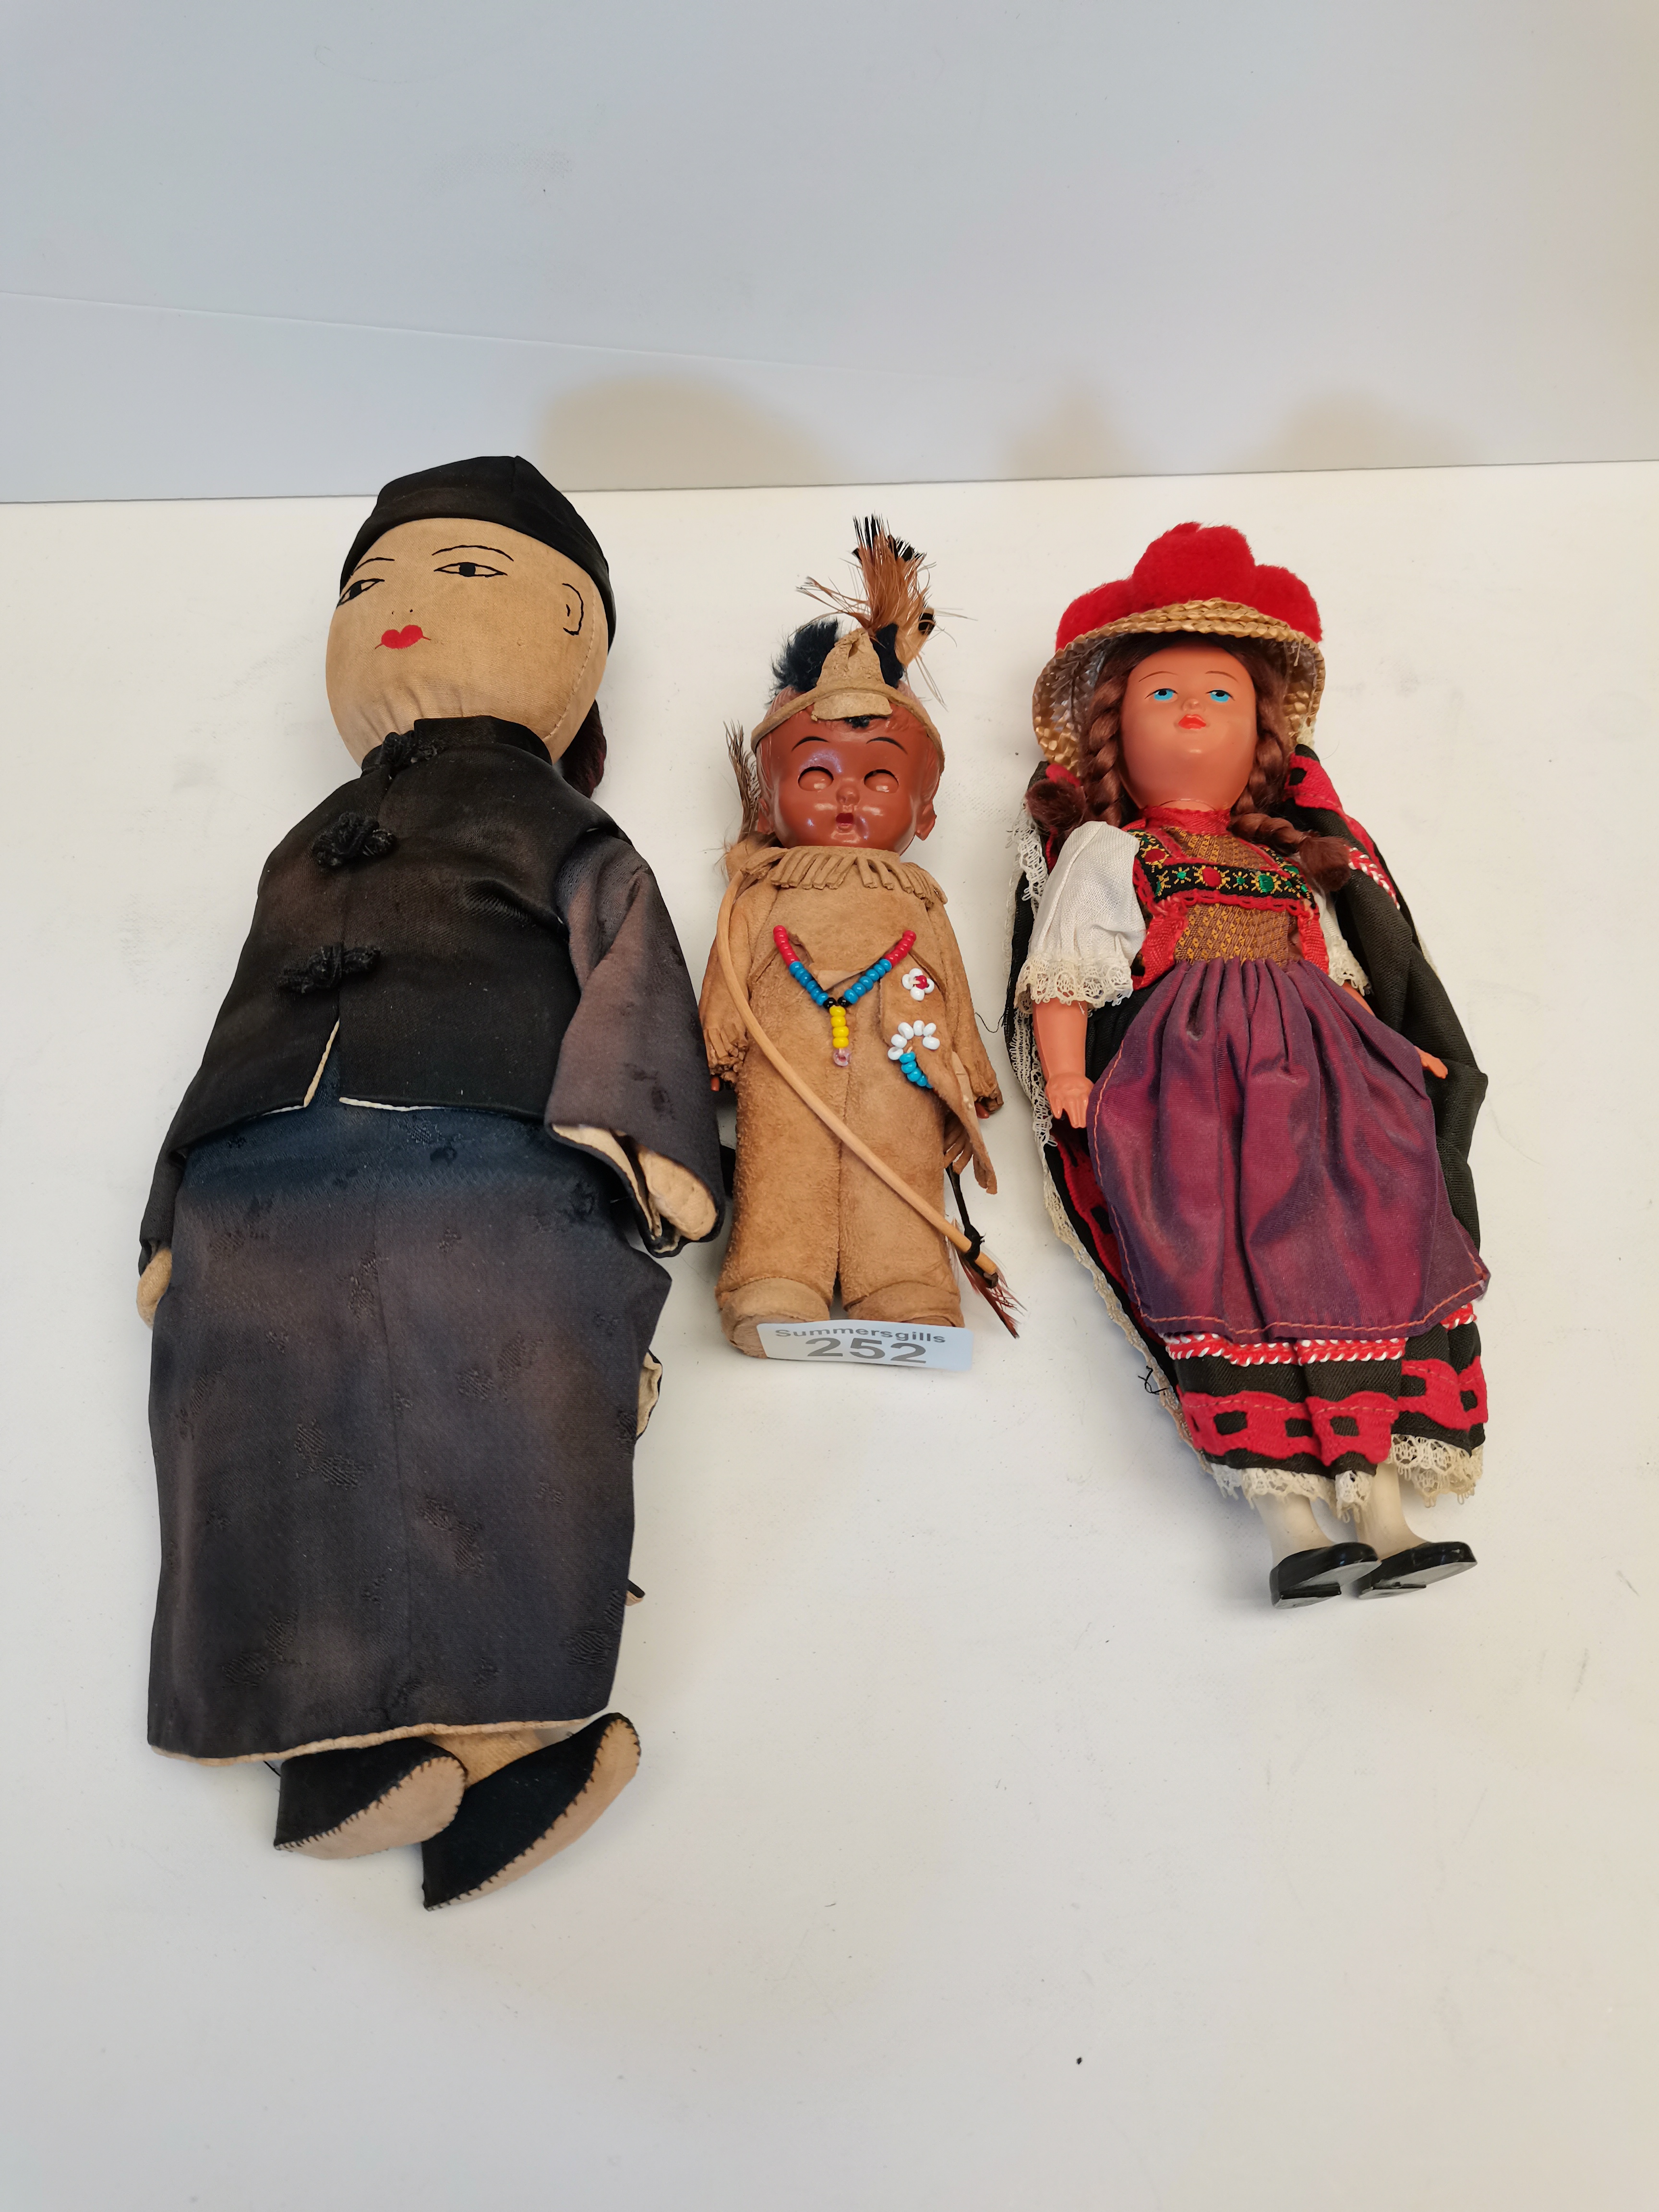 x1 handmade made Chinese doll and x2 old dolls - Image 2 of 2